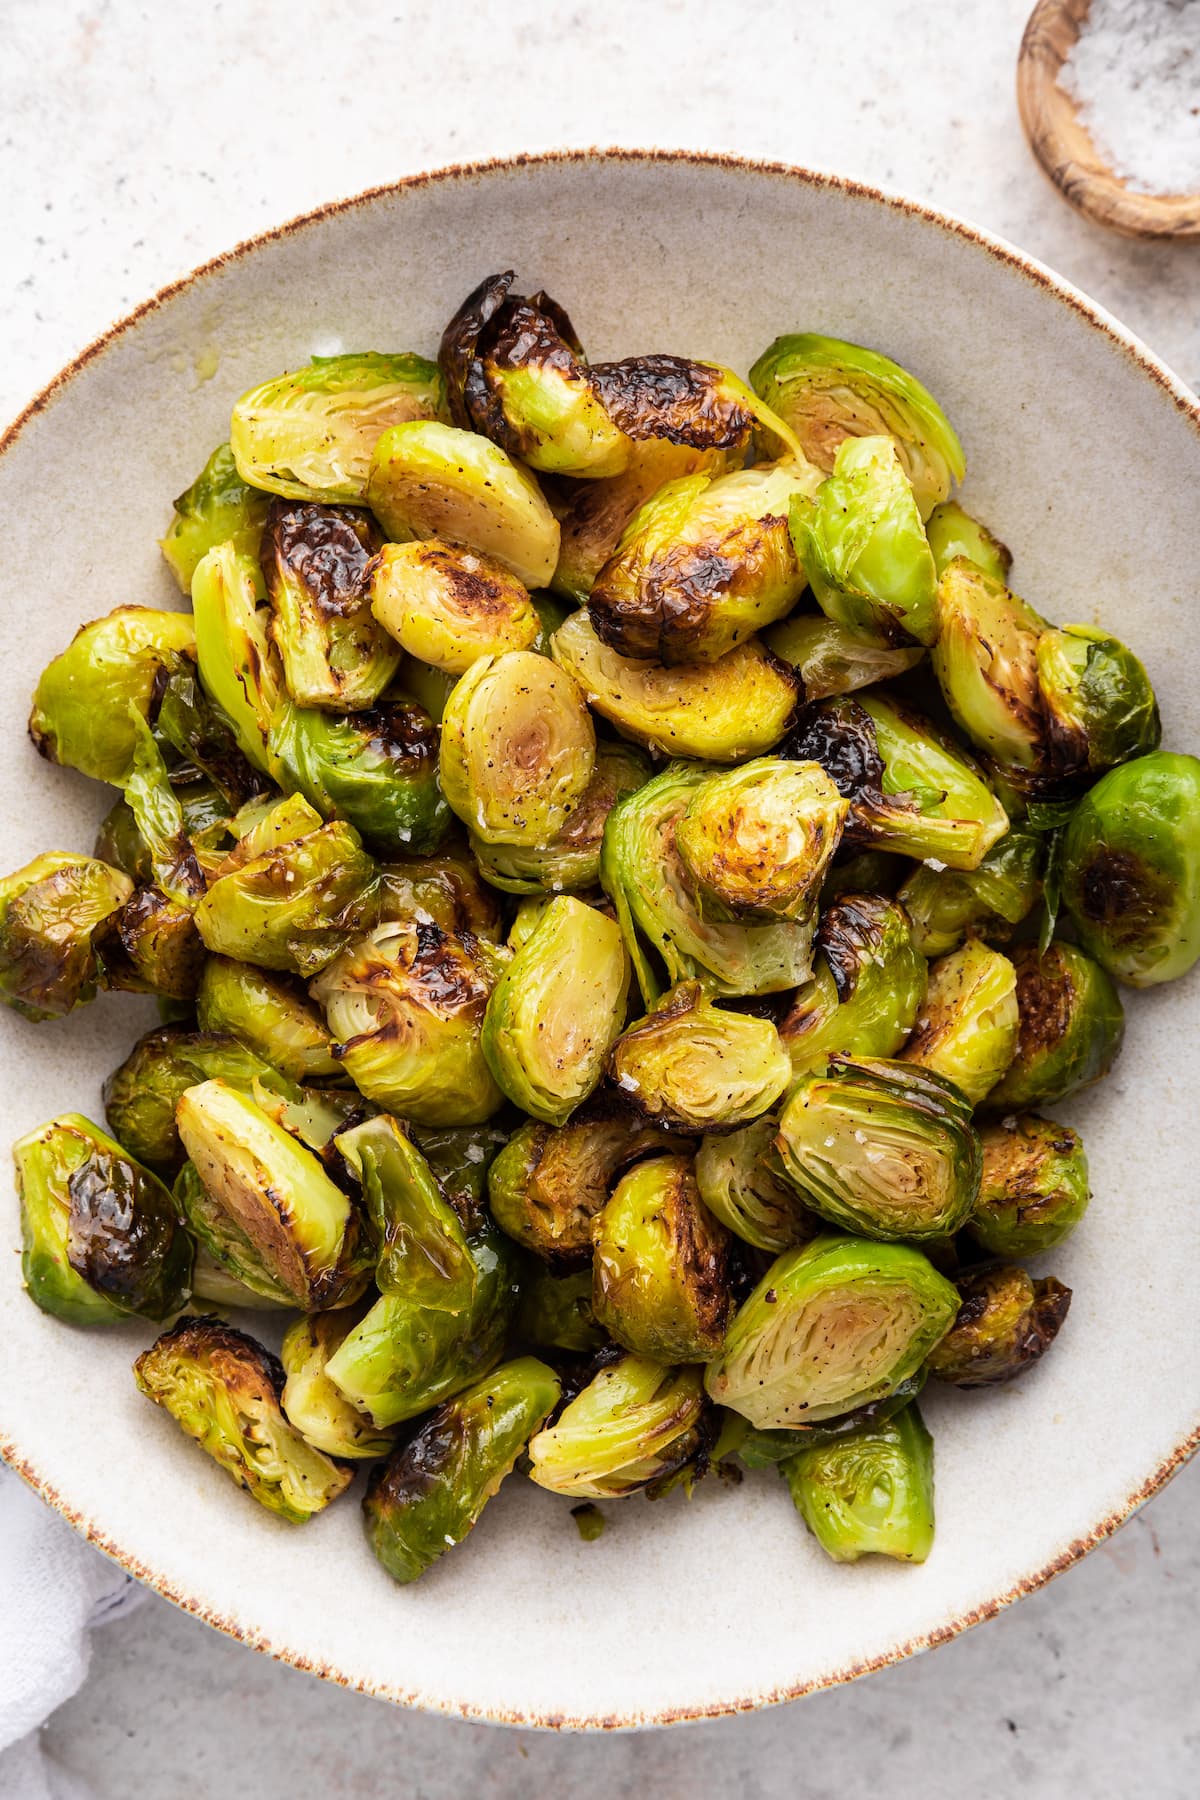 Roasted brussels sprouts in a large serving bowl.